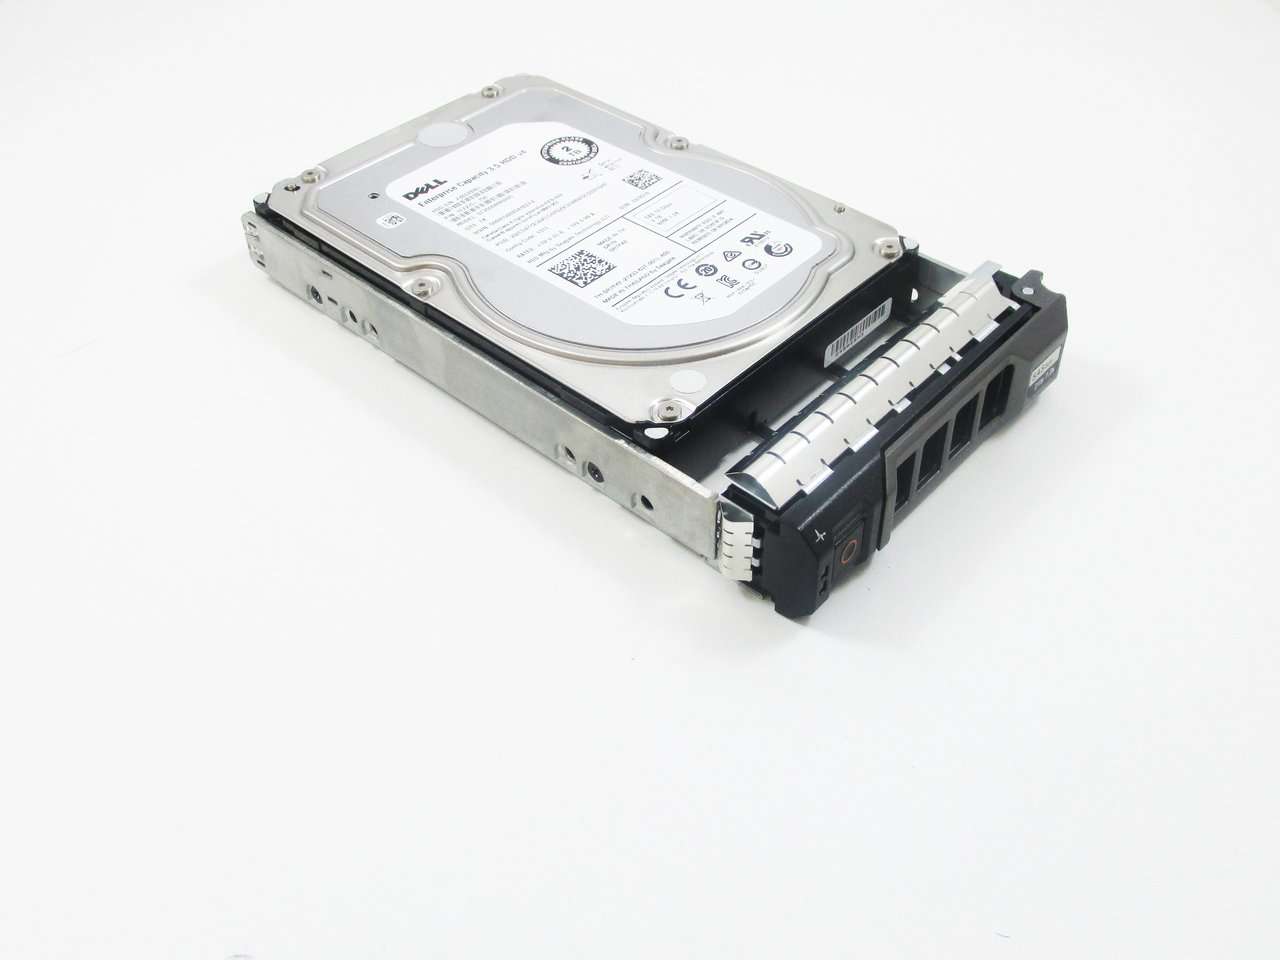 Dell G13 400-ALOB 2TB 7.2K RPM SAS 12Gb/s 512n 3.5" NearLine Manufacturer Recertified HDD